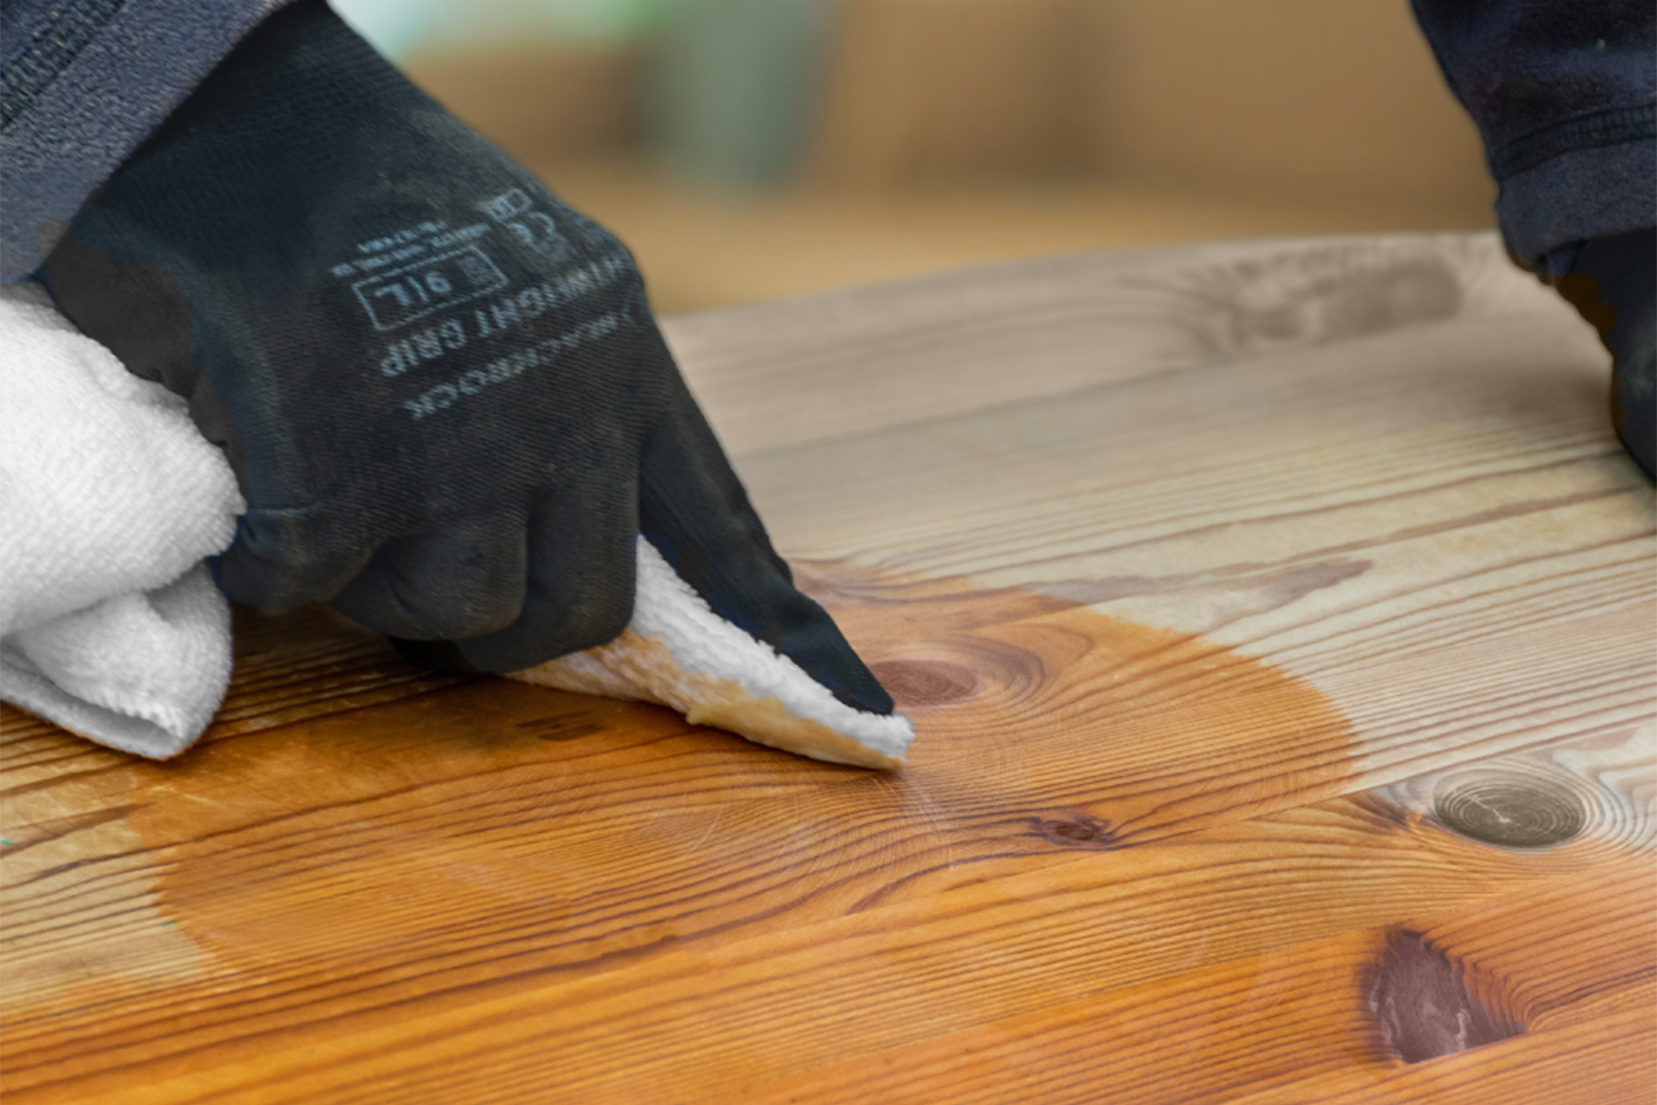 How to use wax wood polishes - Safeguard Europe